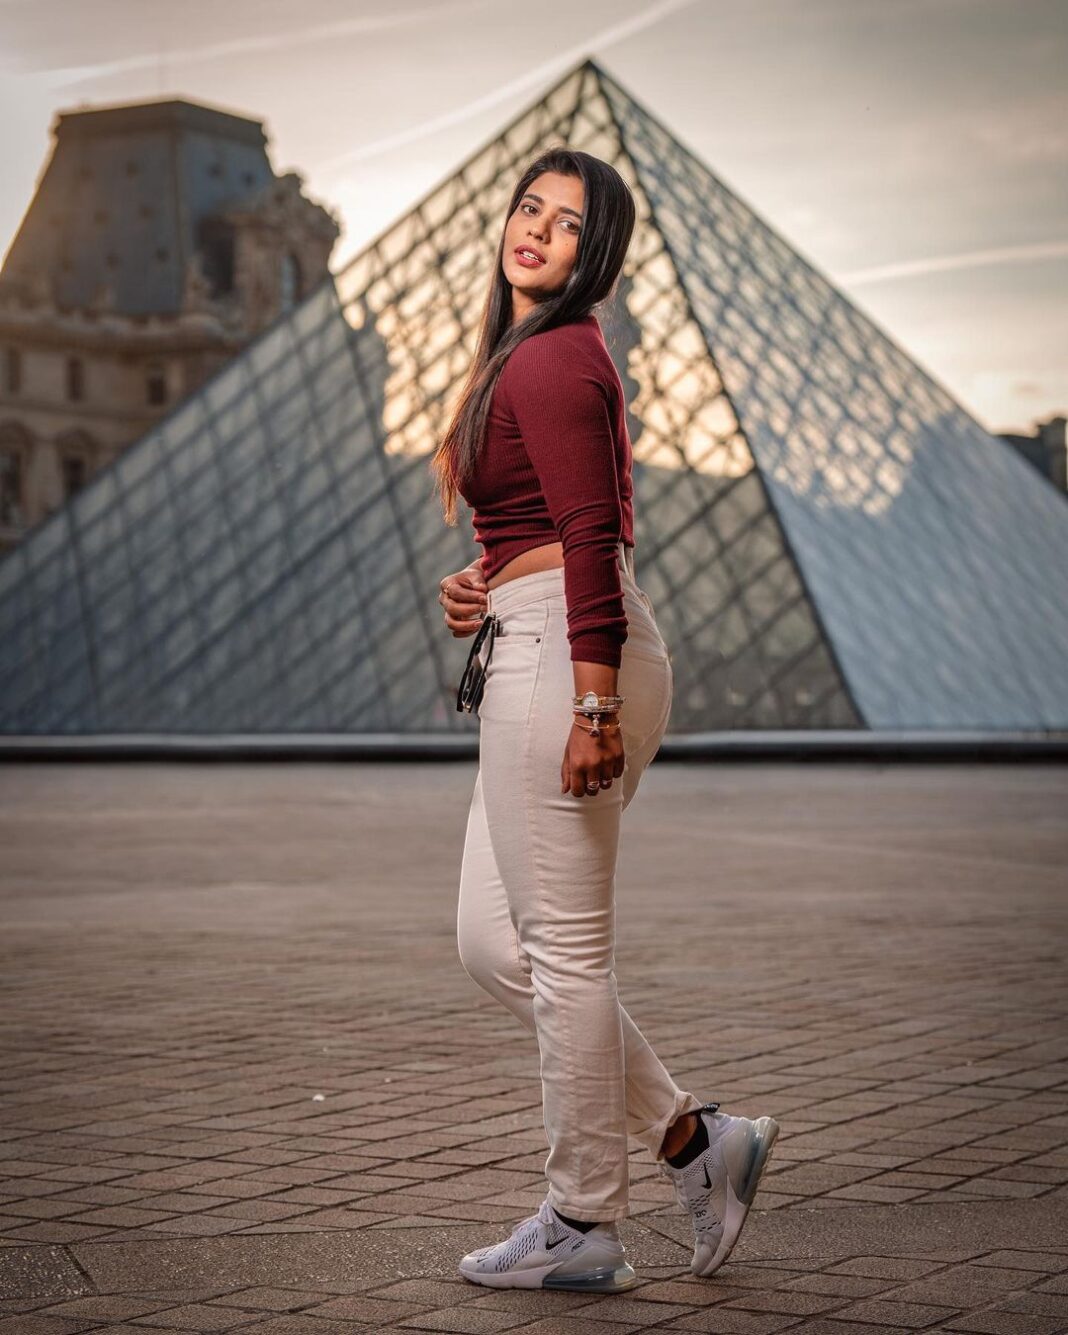 Aishwarya Rajesh Instagram - Laugh as much as you breathe. Love as long as you live. Photography @anandstudiosfr #louvremuseum #parisfrance @skylife_harmony